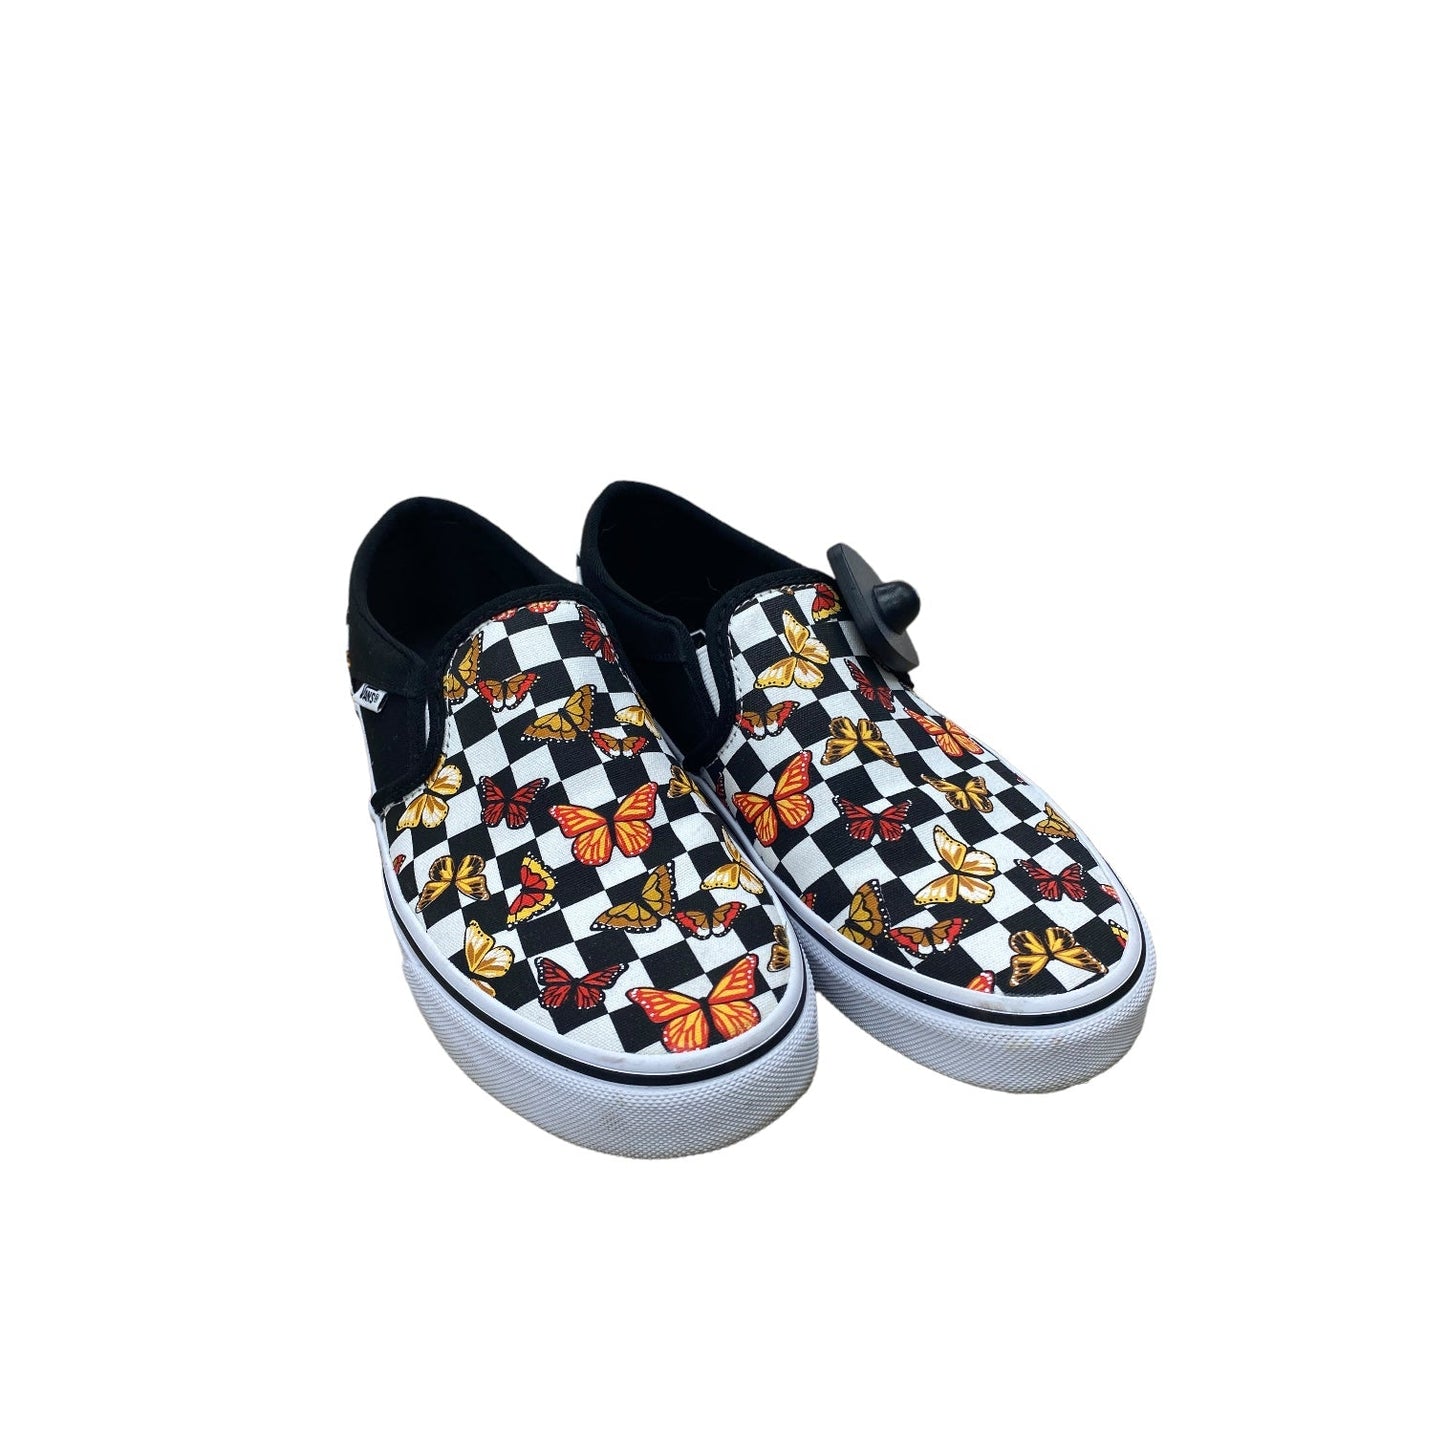 Checkered Pattern Shoes Sneakers Vans, Size 8